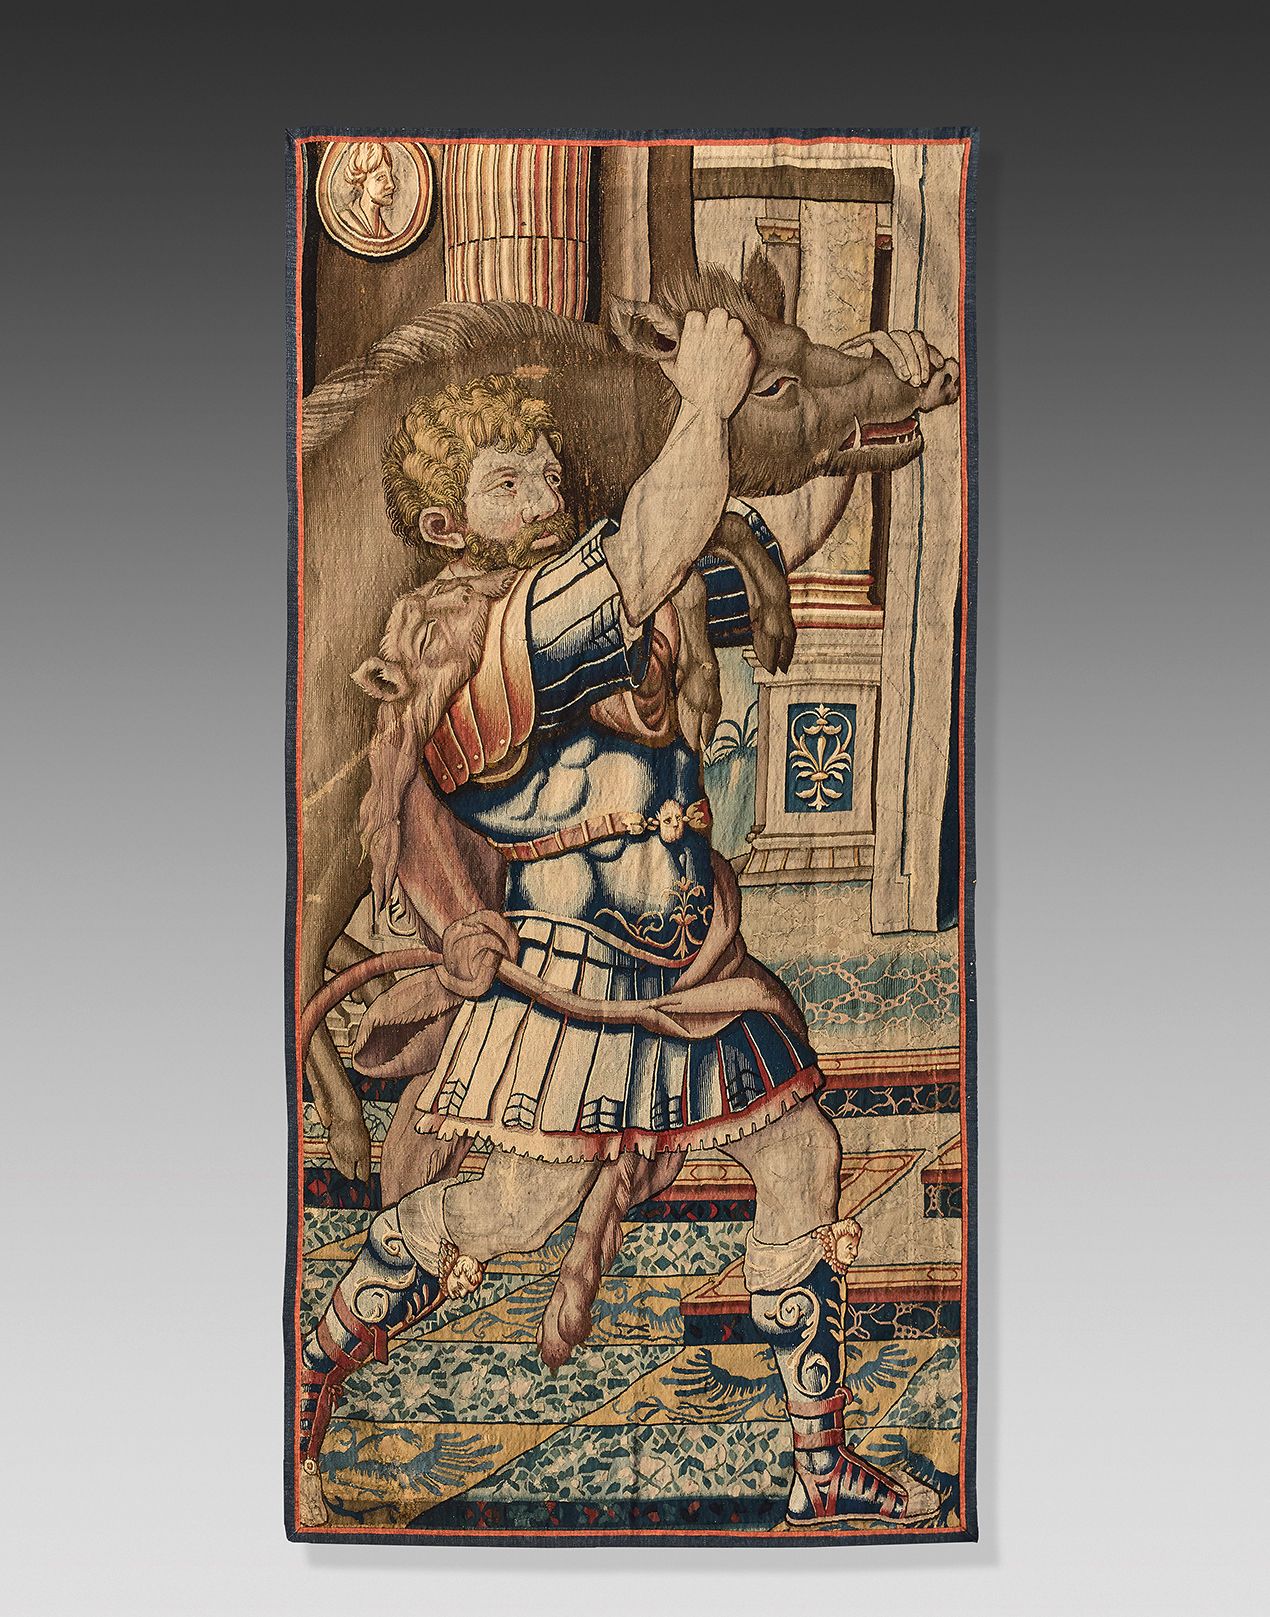 Null Rare tapestry illustrating "Hercules and the boar
Erymanthe" from the Hercu&hellip;